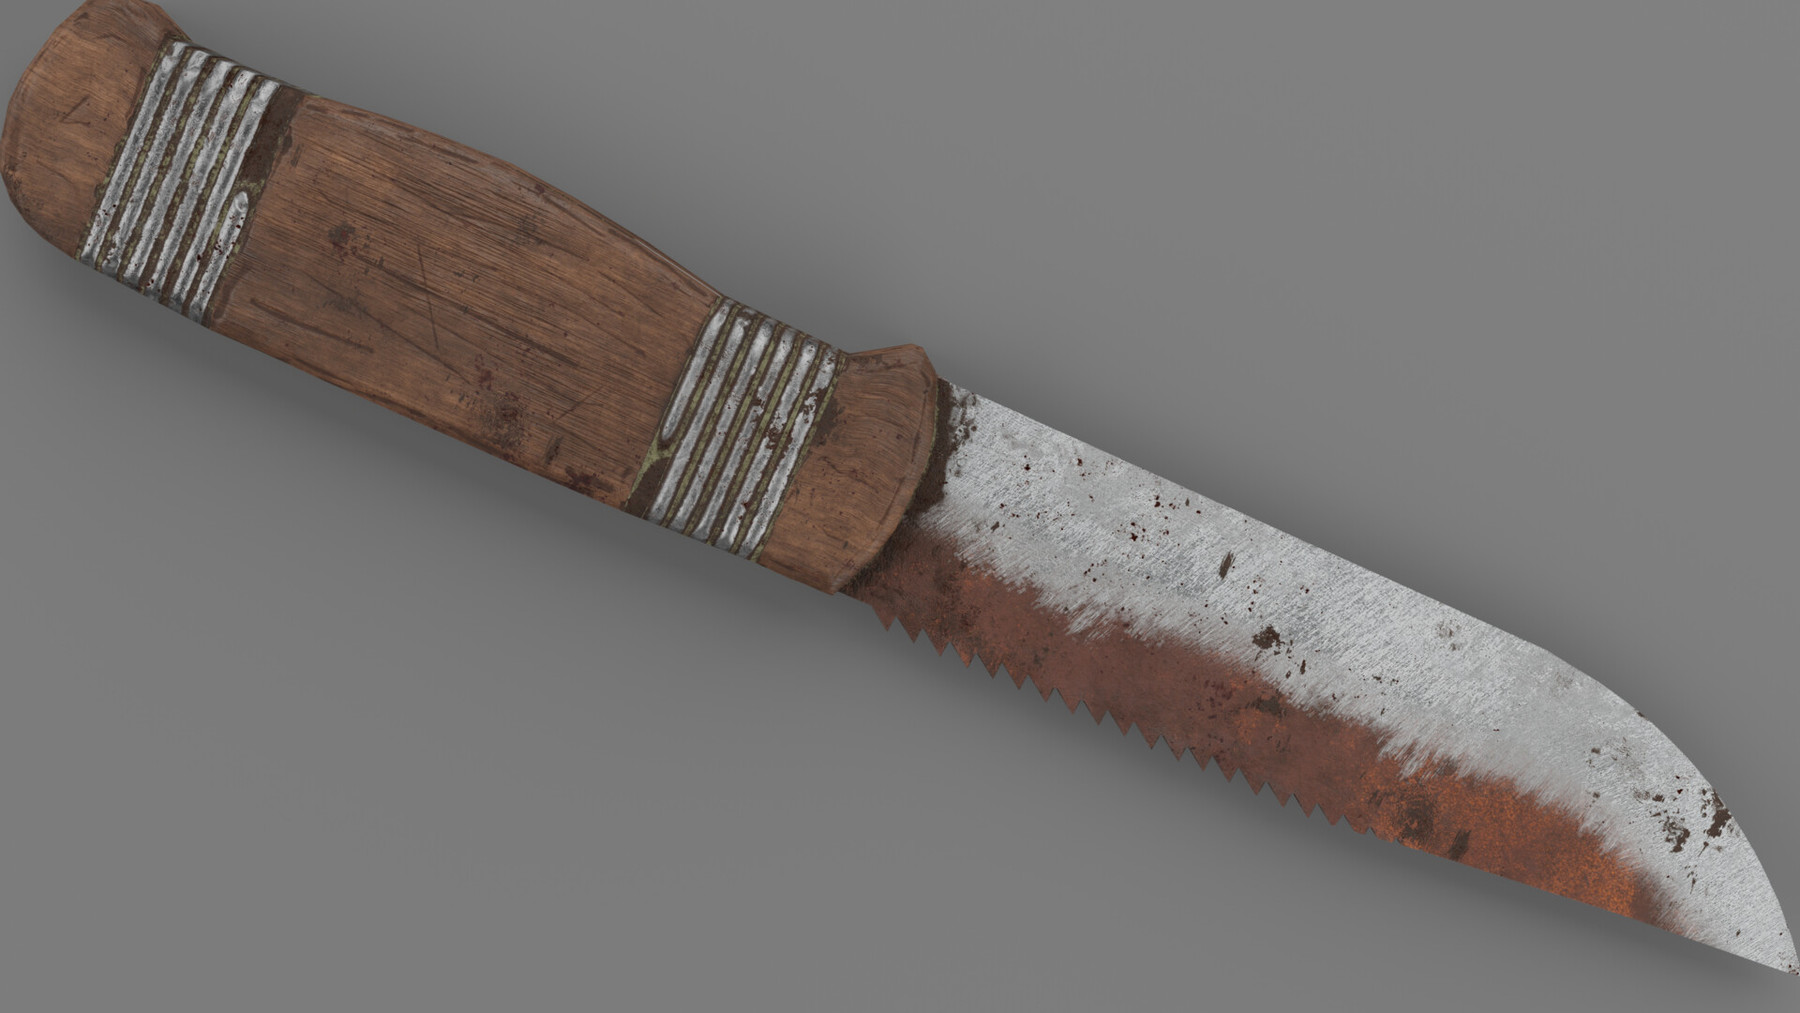 ArtStation - Knife in the style of Fallout. | Game Assets